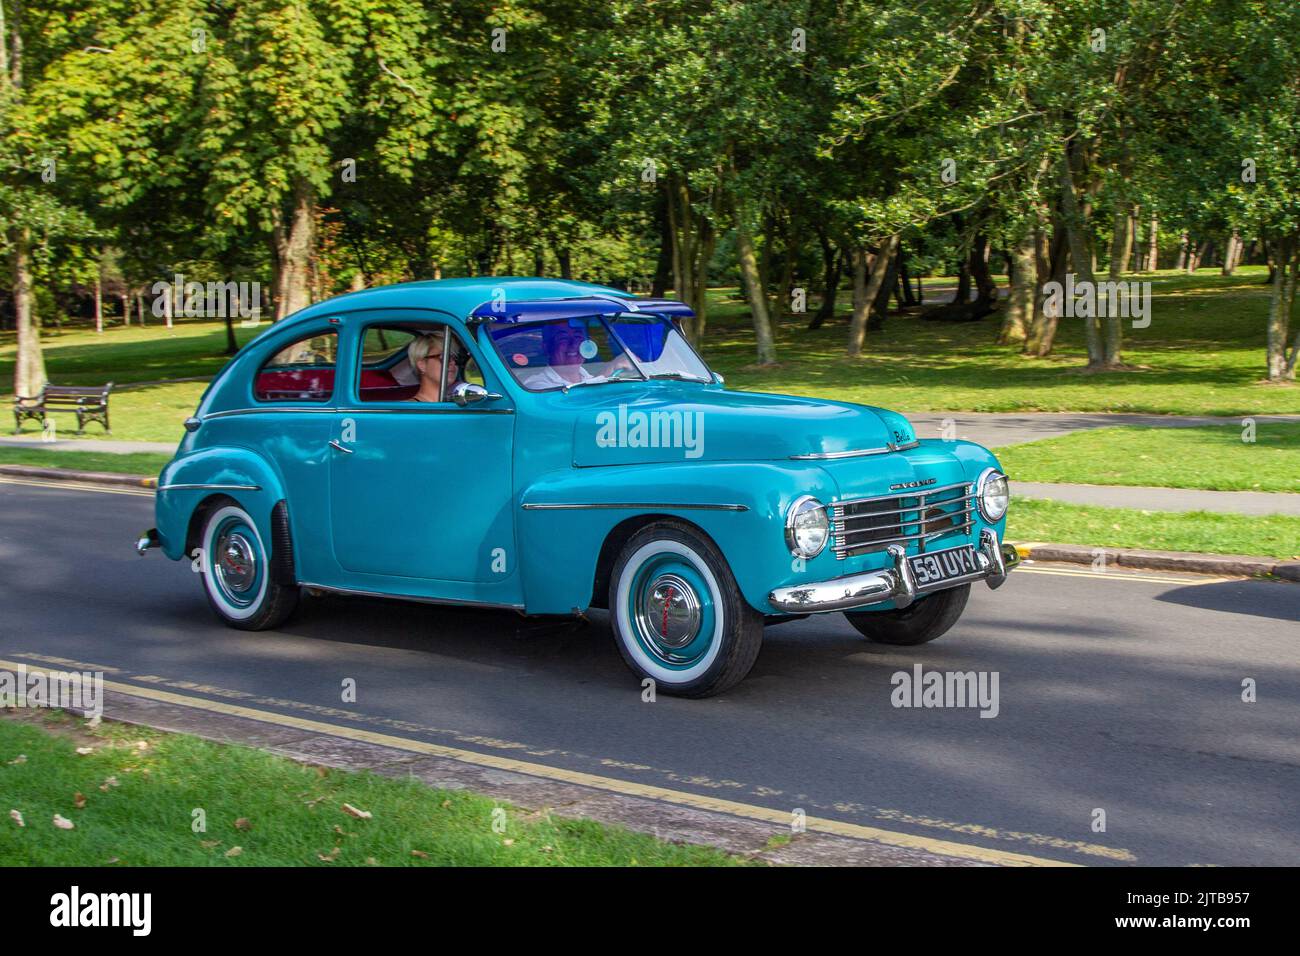 1954 50s fifties Blue VOLVO PV444-HB 1414cc petrol Swedish sedan; Cars arriving at the annual Stanley Park Classic Car Show in the park gardens. Stanley Park classics yesteryear Motor Show Hosted By Blackpool Vintage Vehicle Preservation Group, UK. Stock Photo